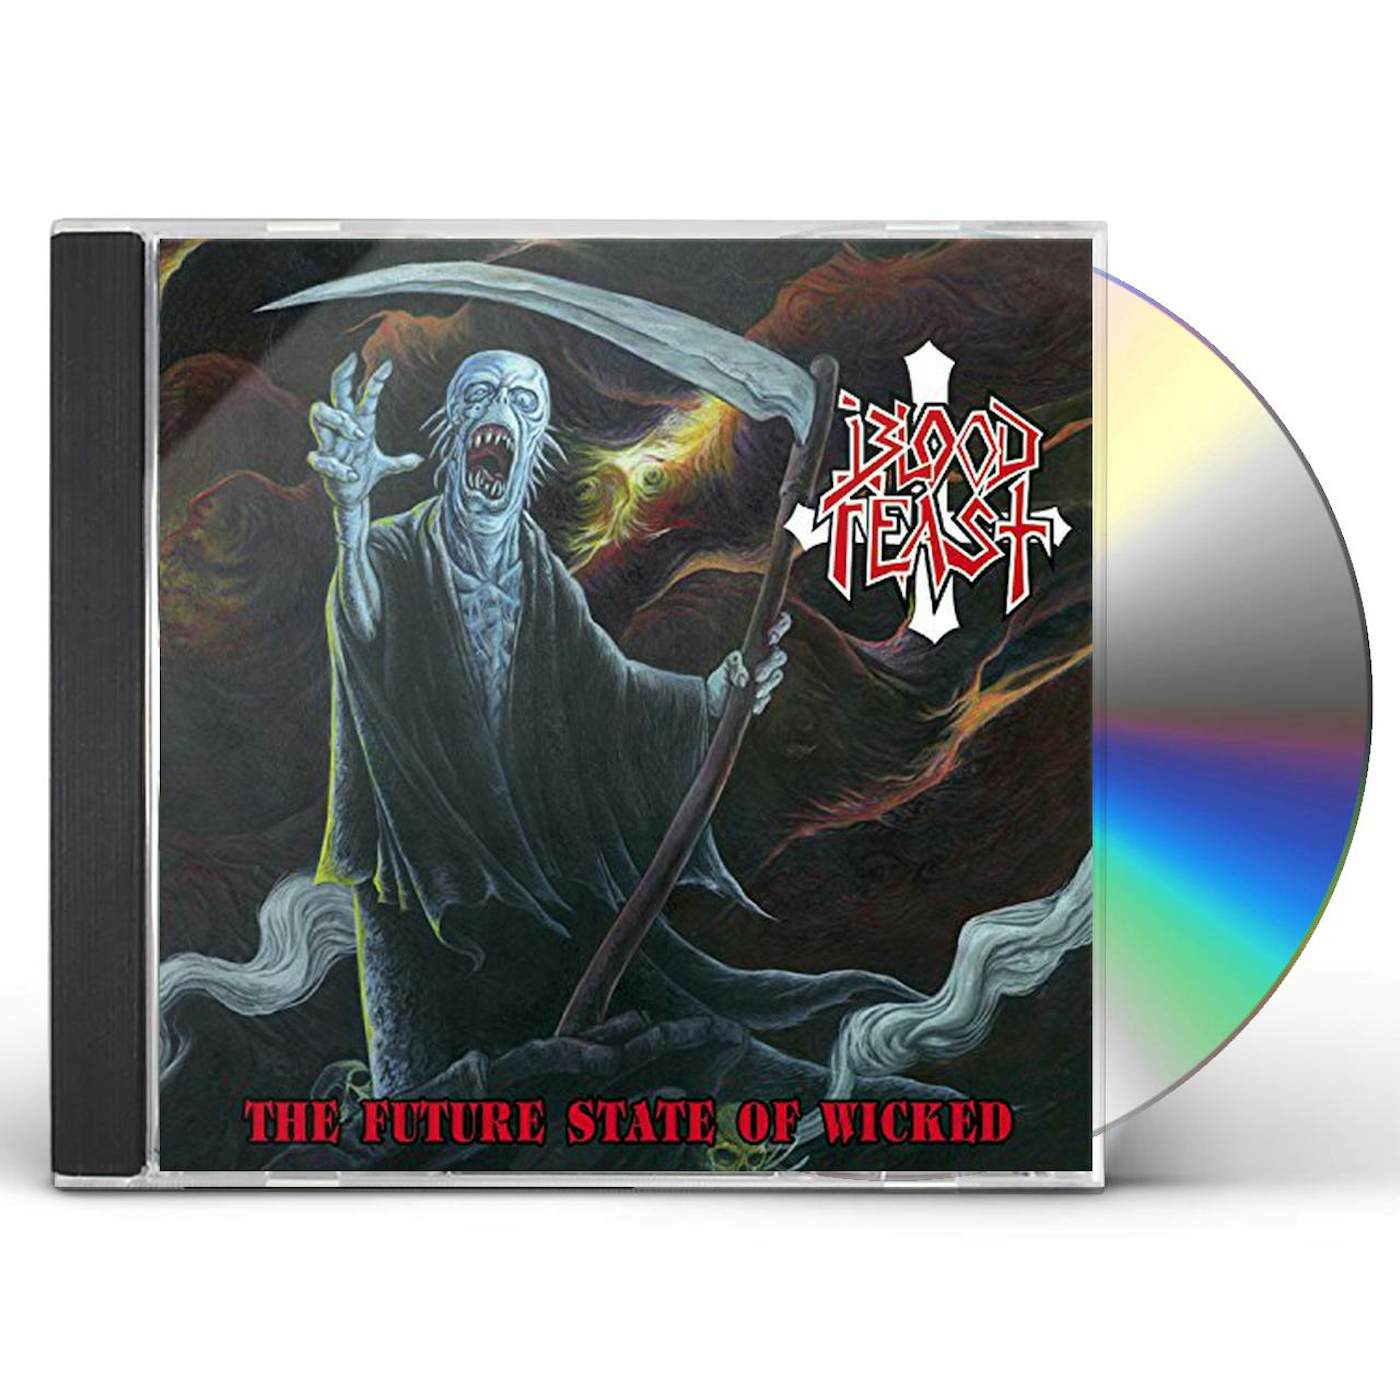 Blood Feast FUTURE STATE OF WICKED CD